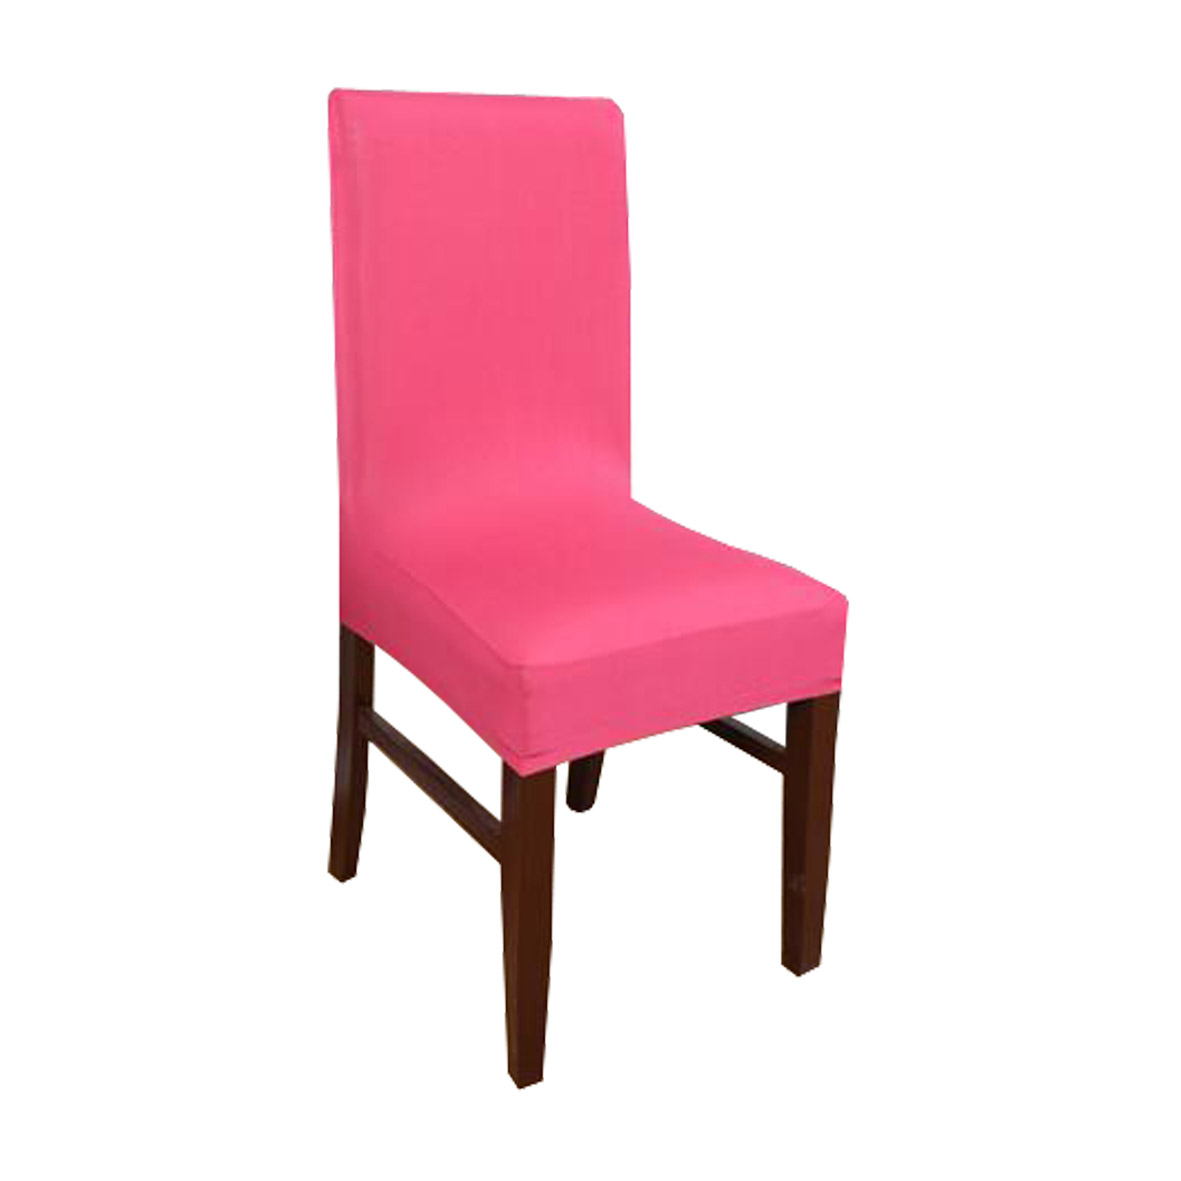 GL-AAA1398 Half Stretch Dining Chair Cover